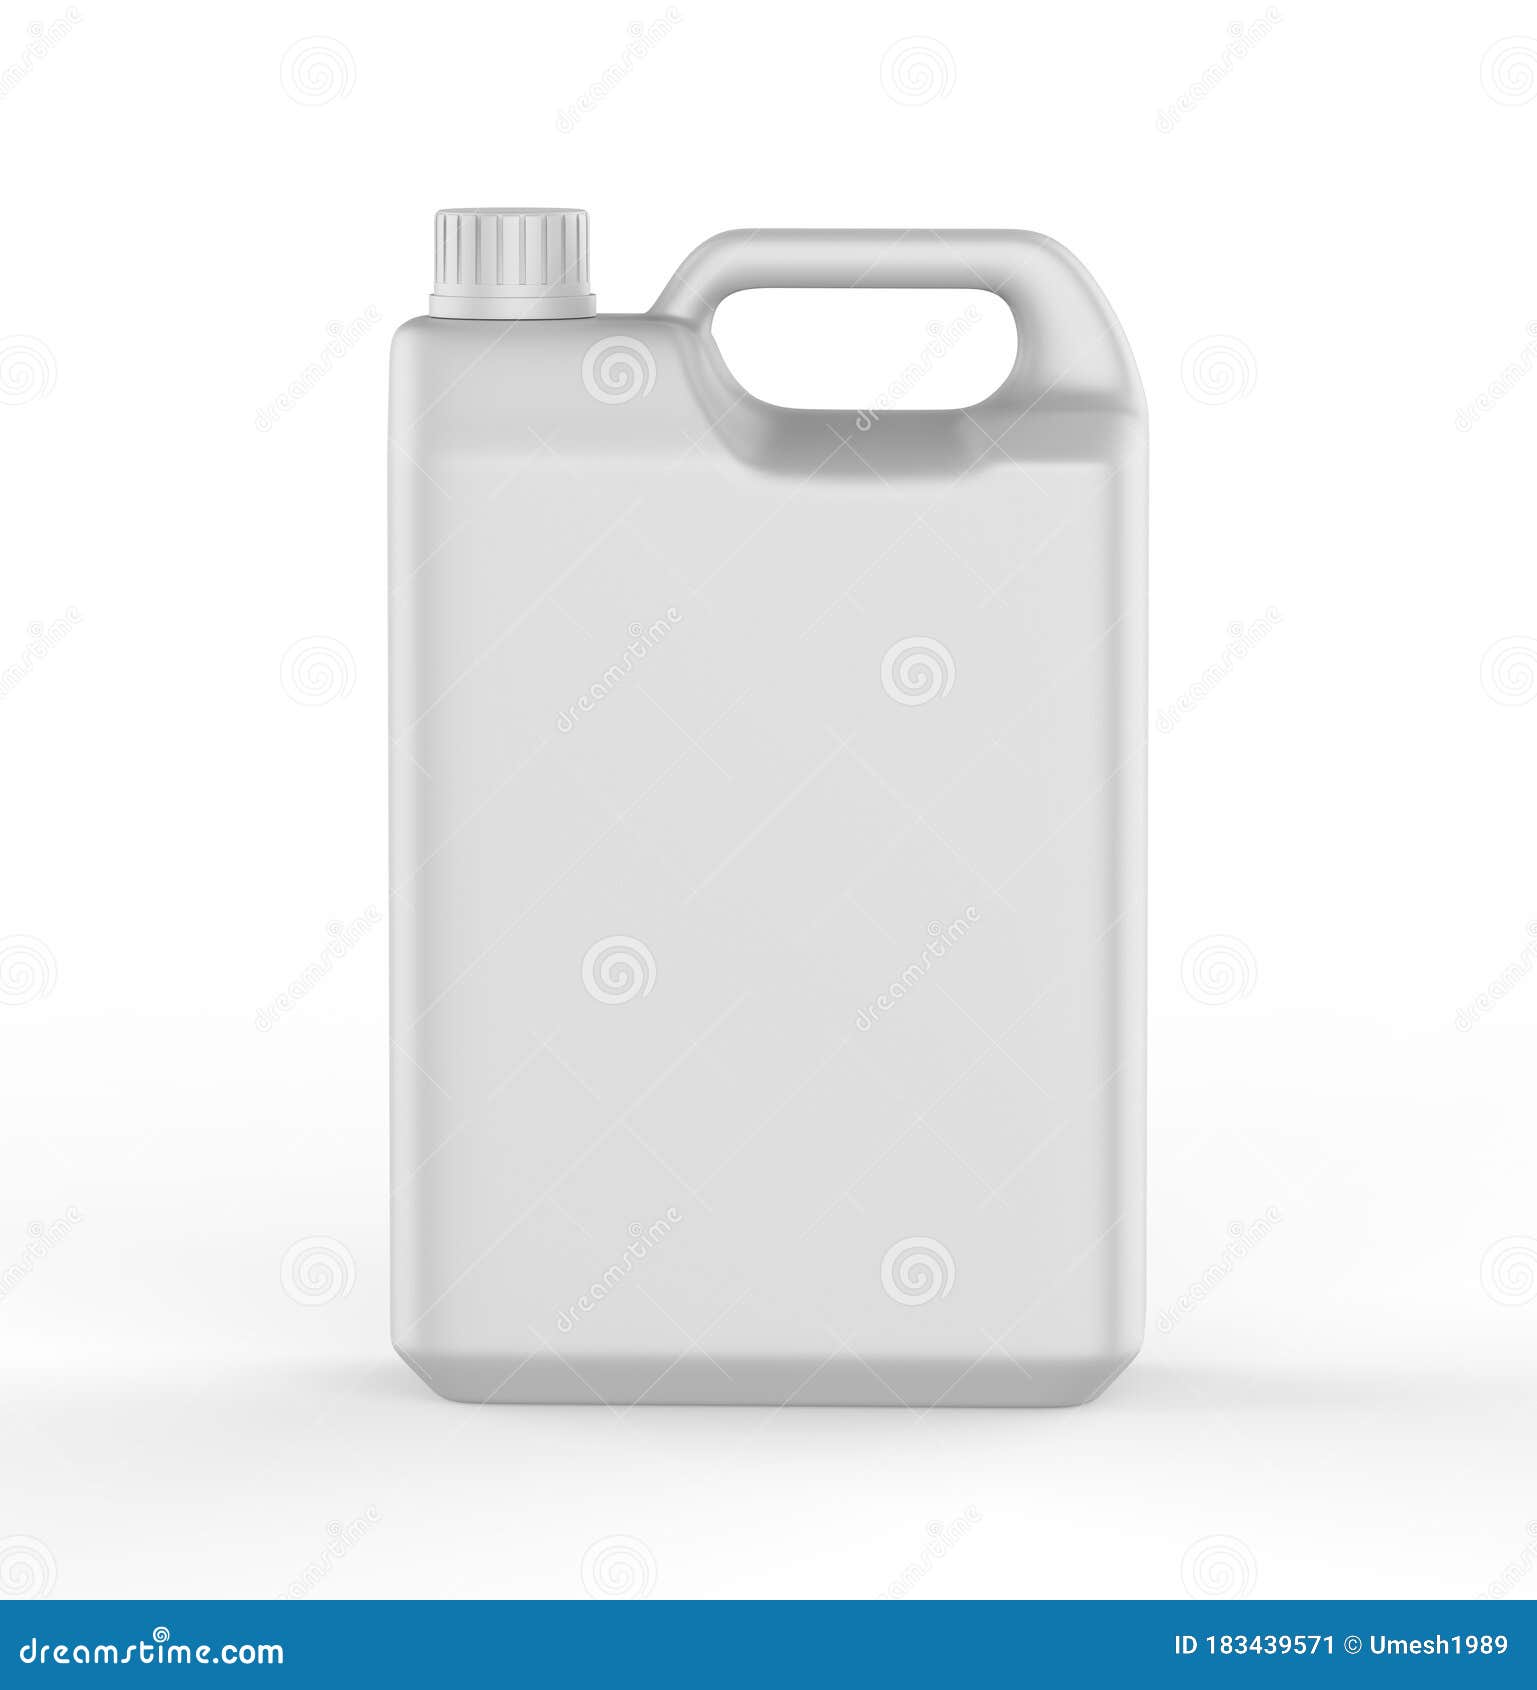 Download Blank Plastic JerryCan With Handle On White Background For Branding And Mock Up, 3d Illustration ...